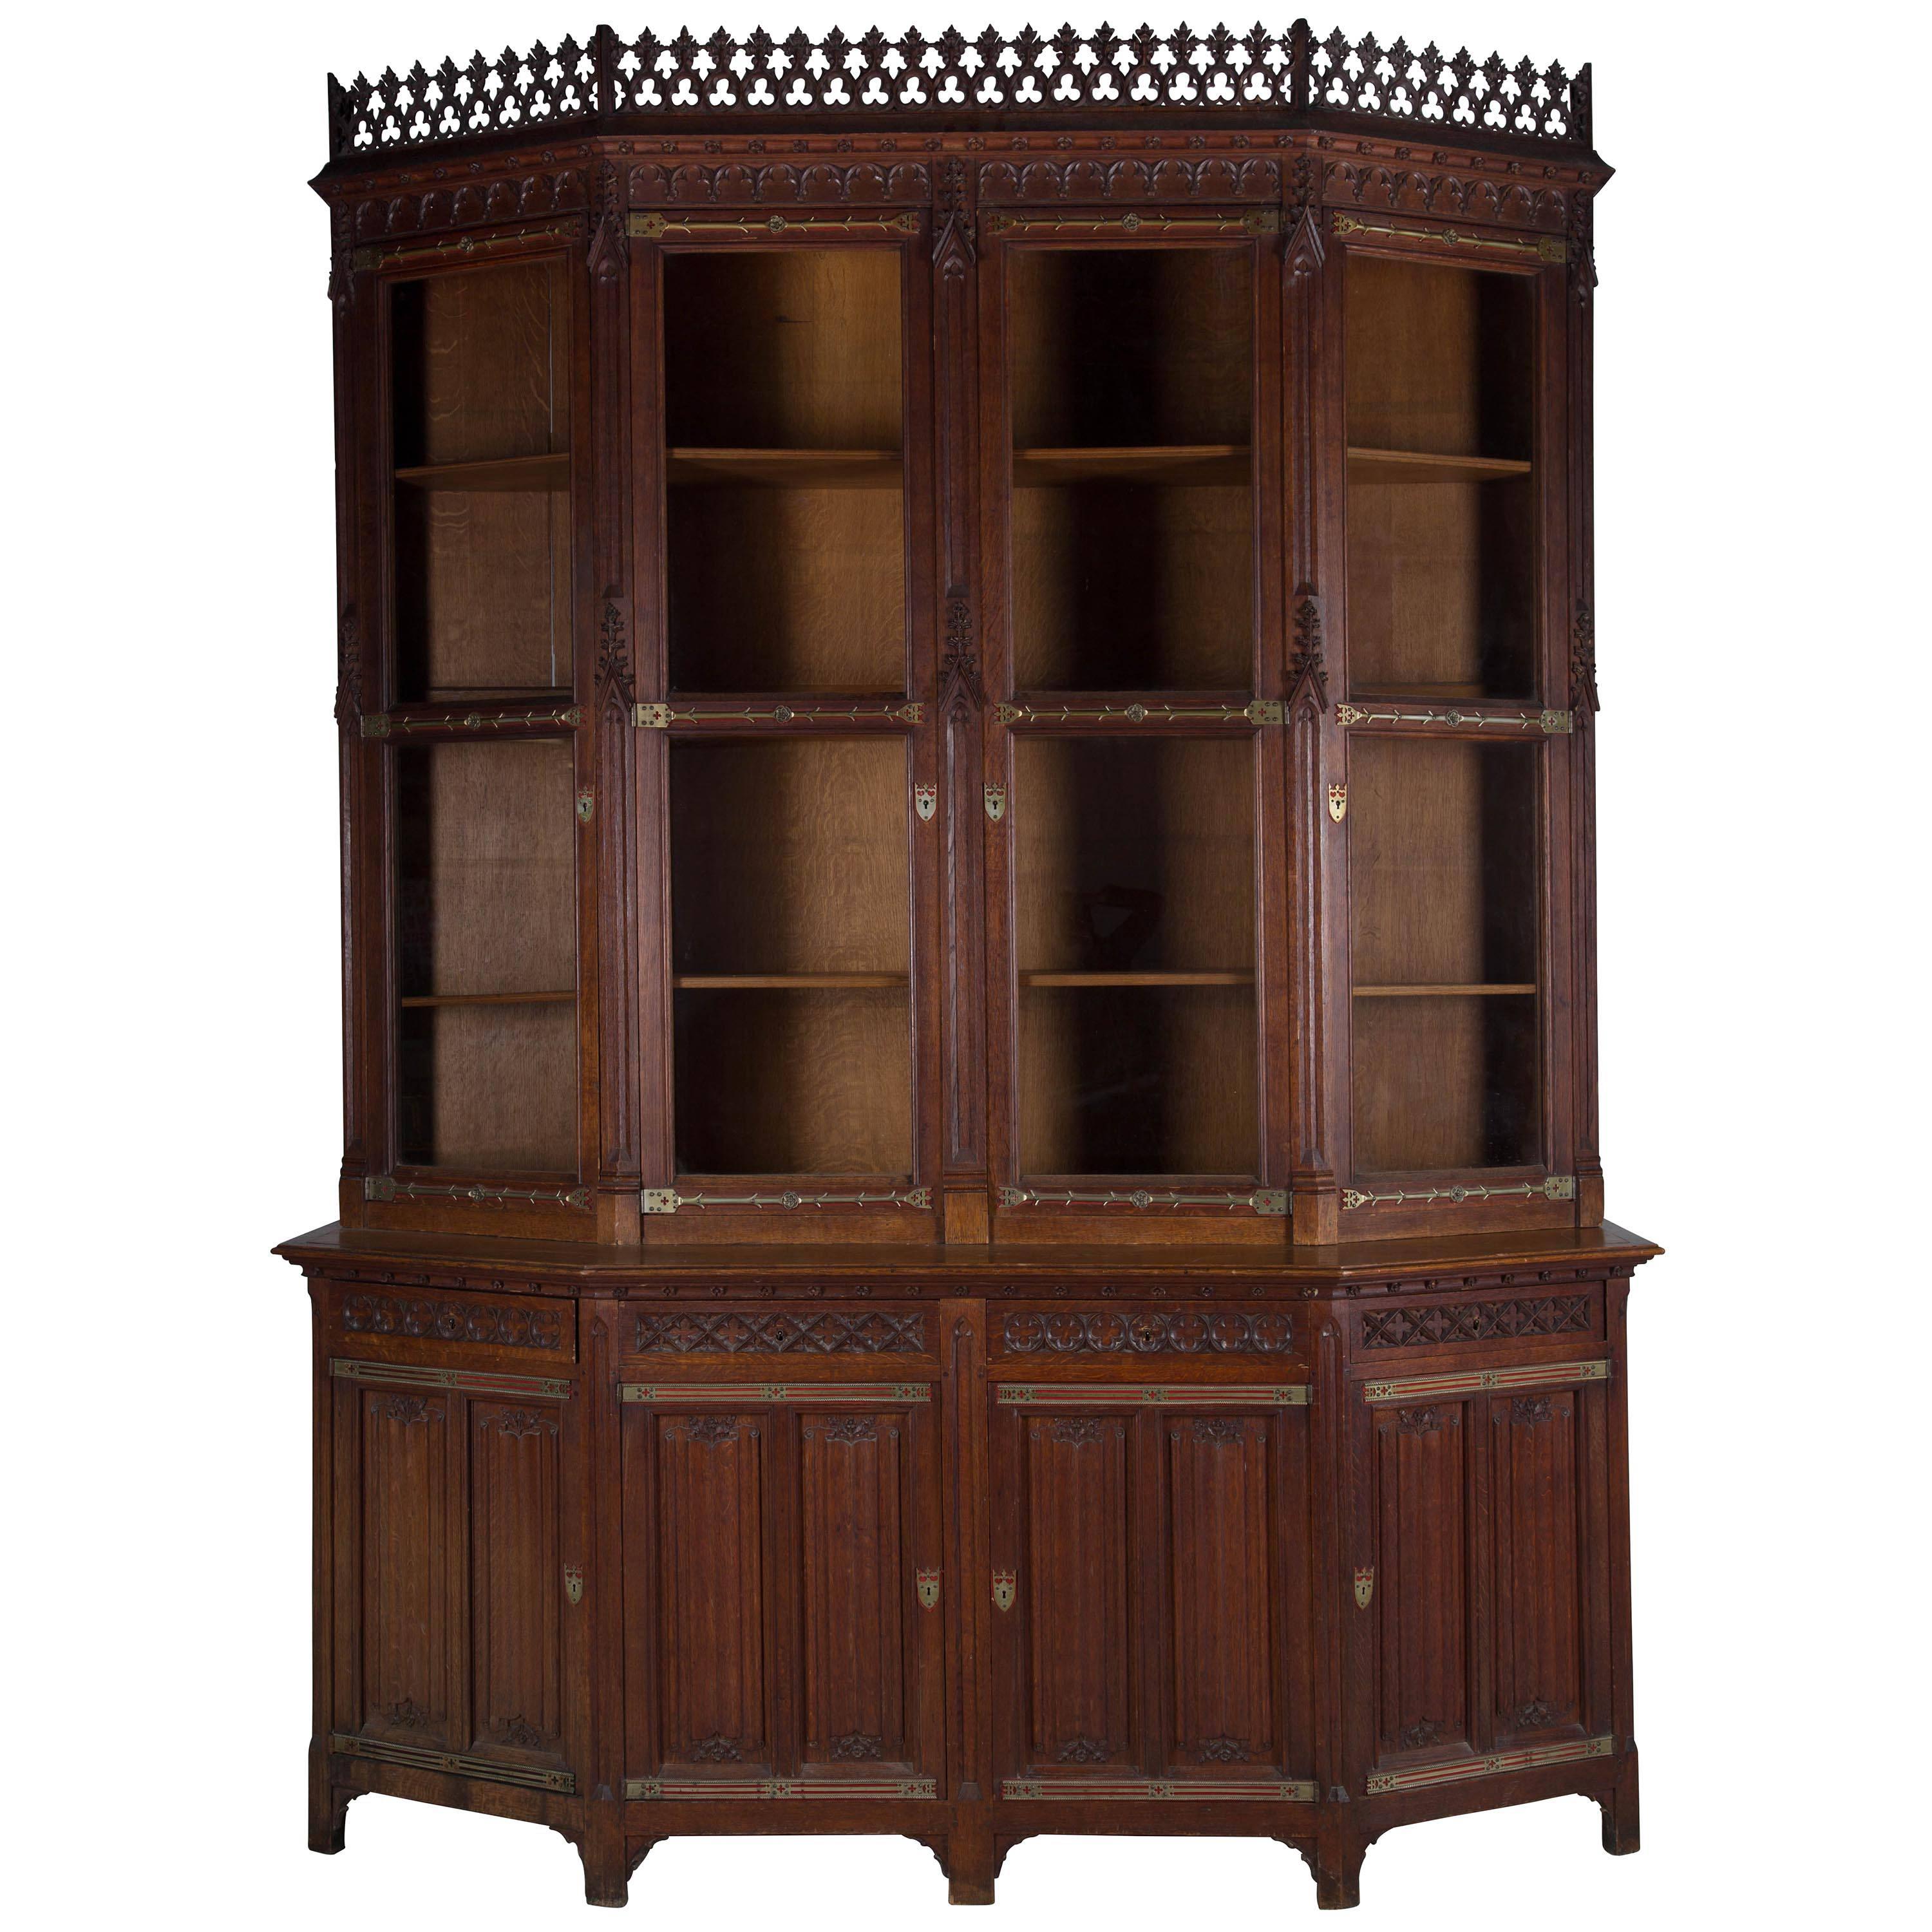 Gothic Revival Library Bookcase